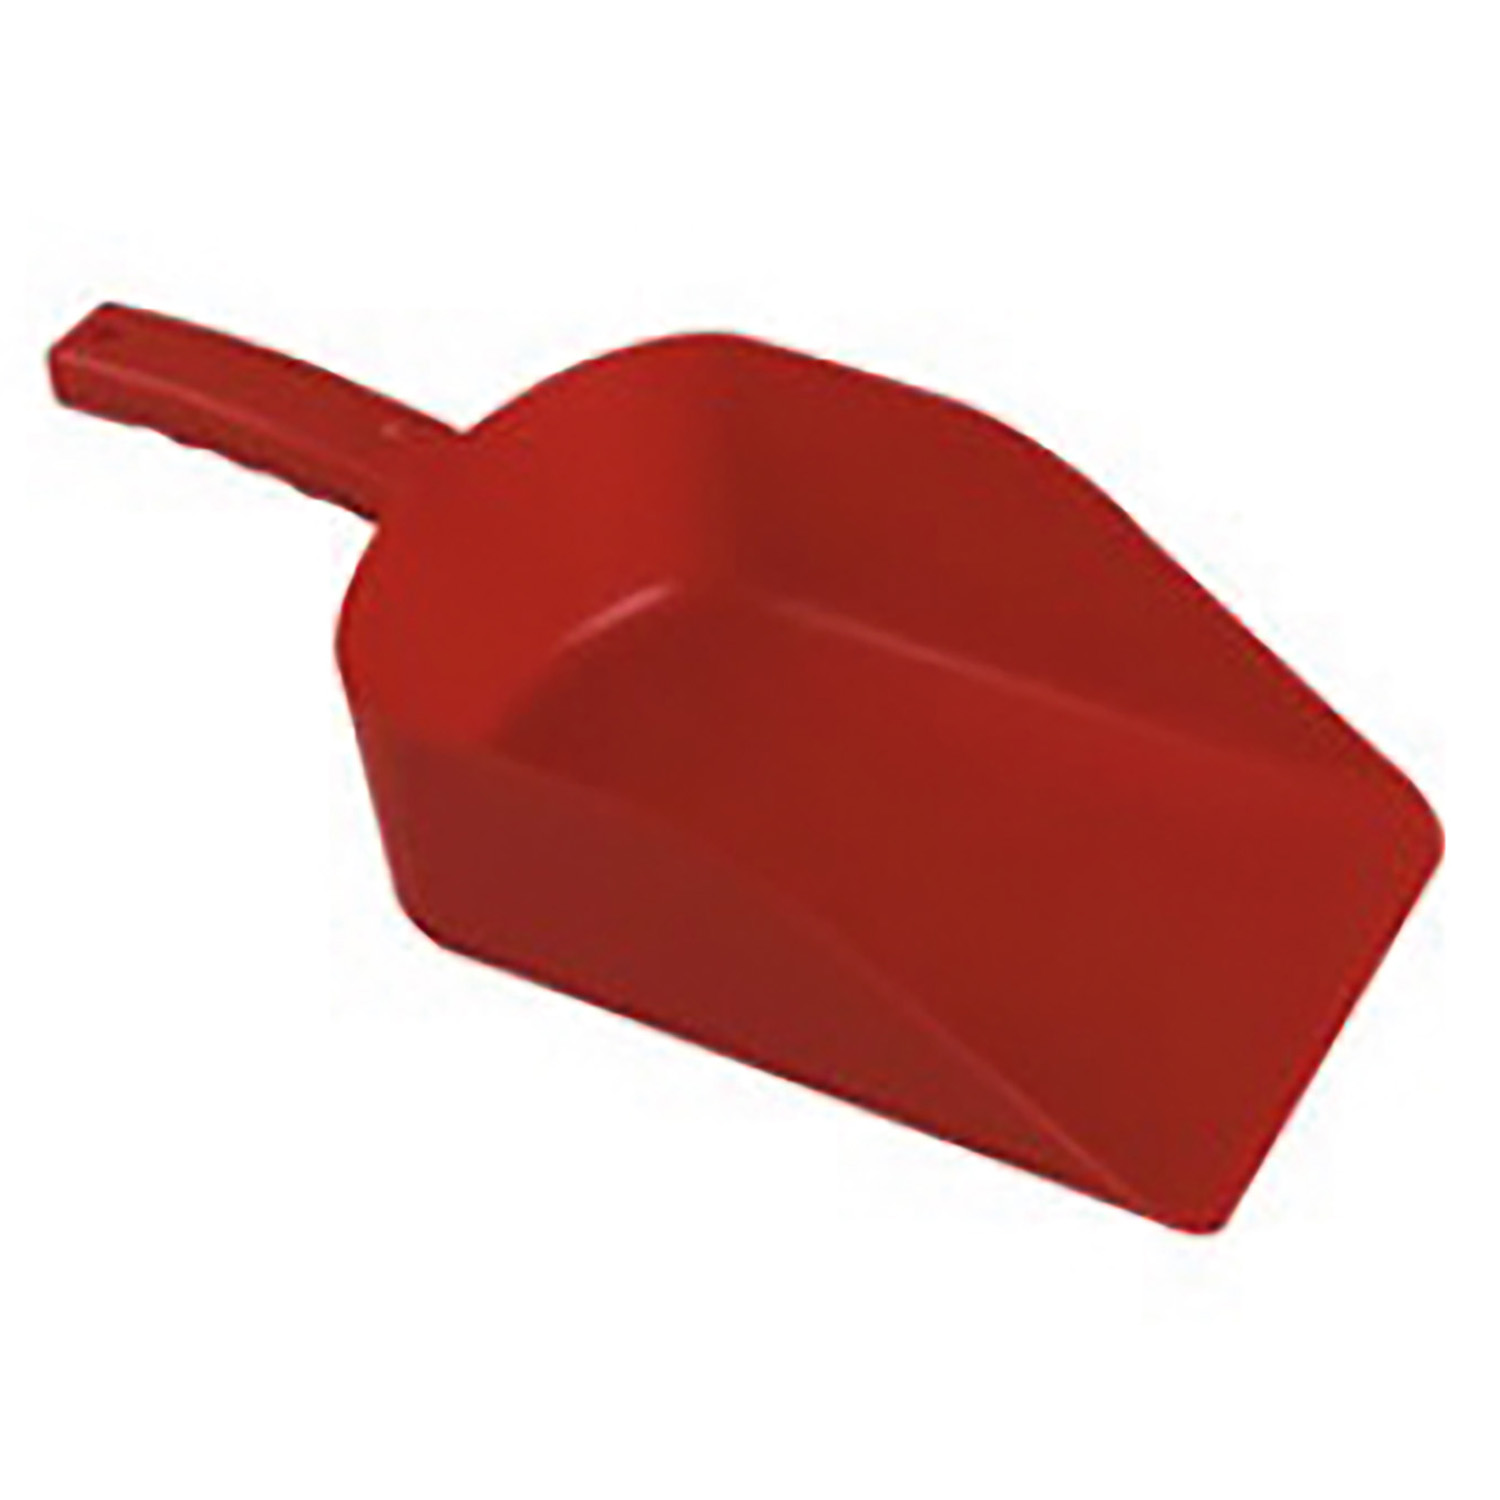 HILLBRUSH FEED SCOOP LARGE RED LARGE